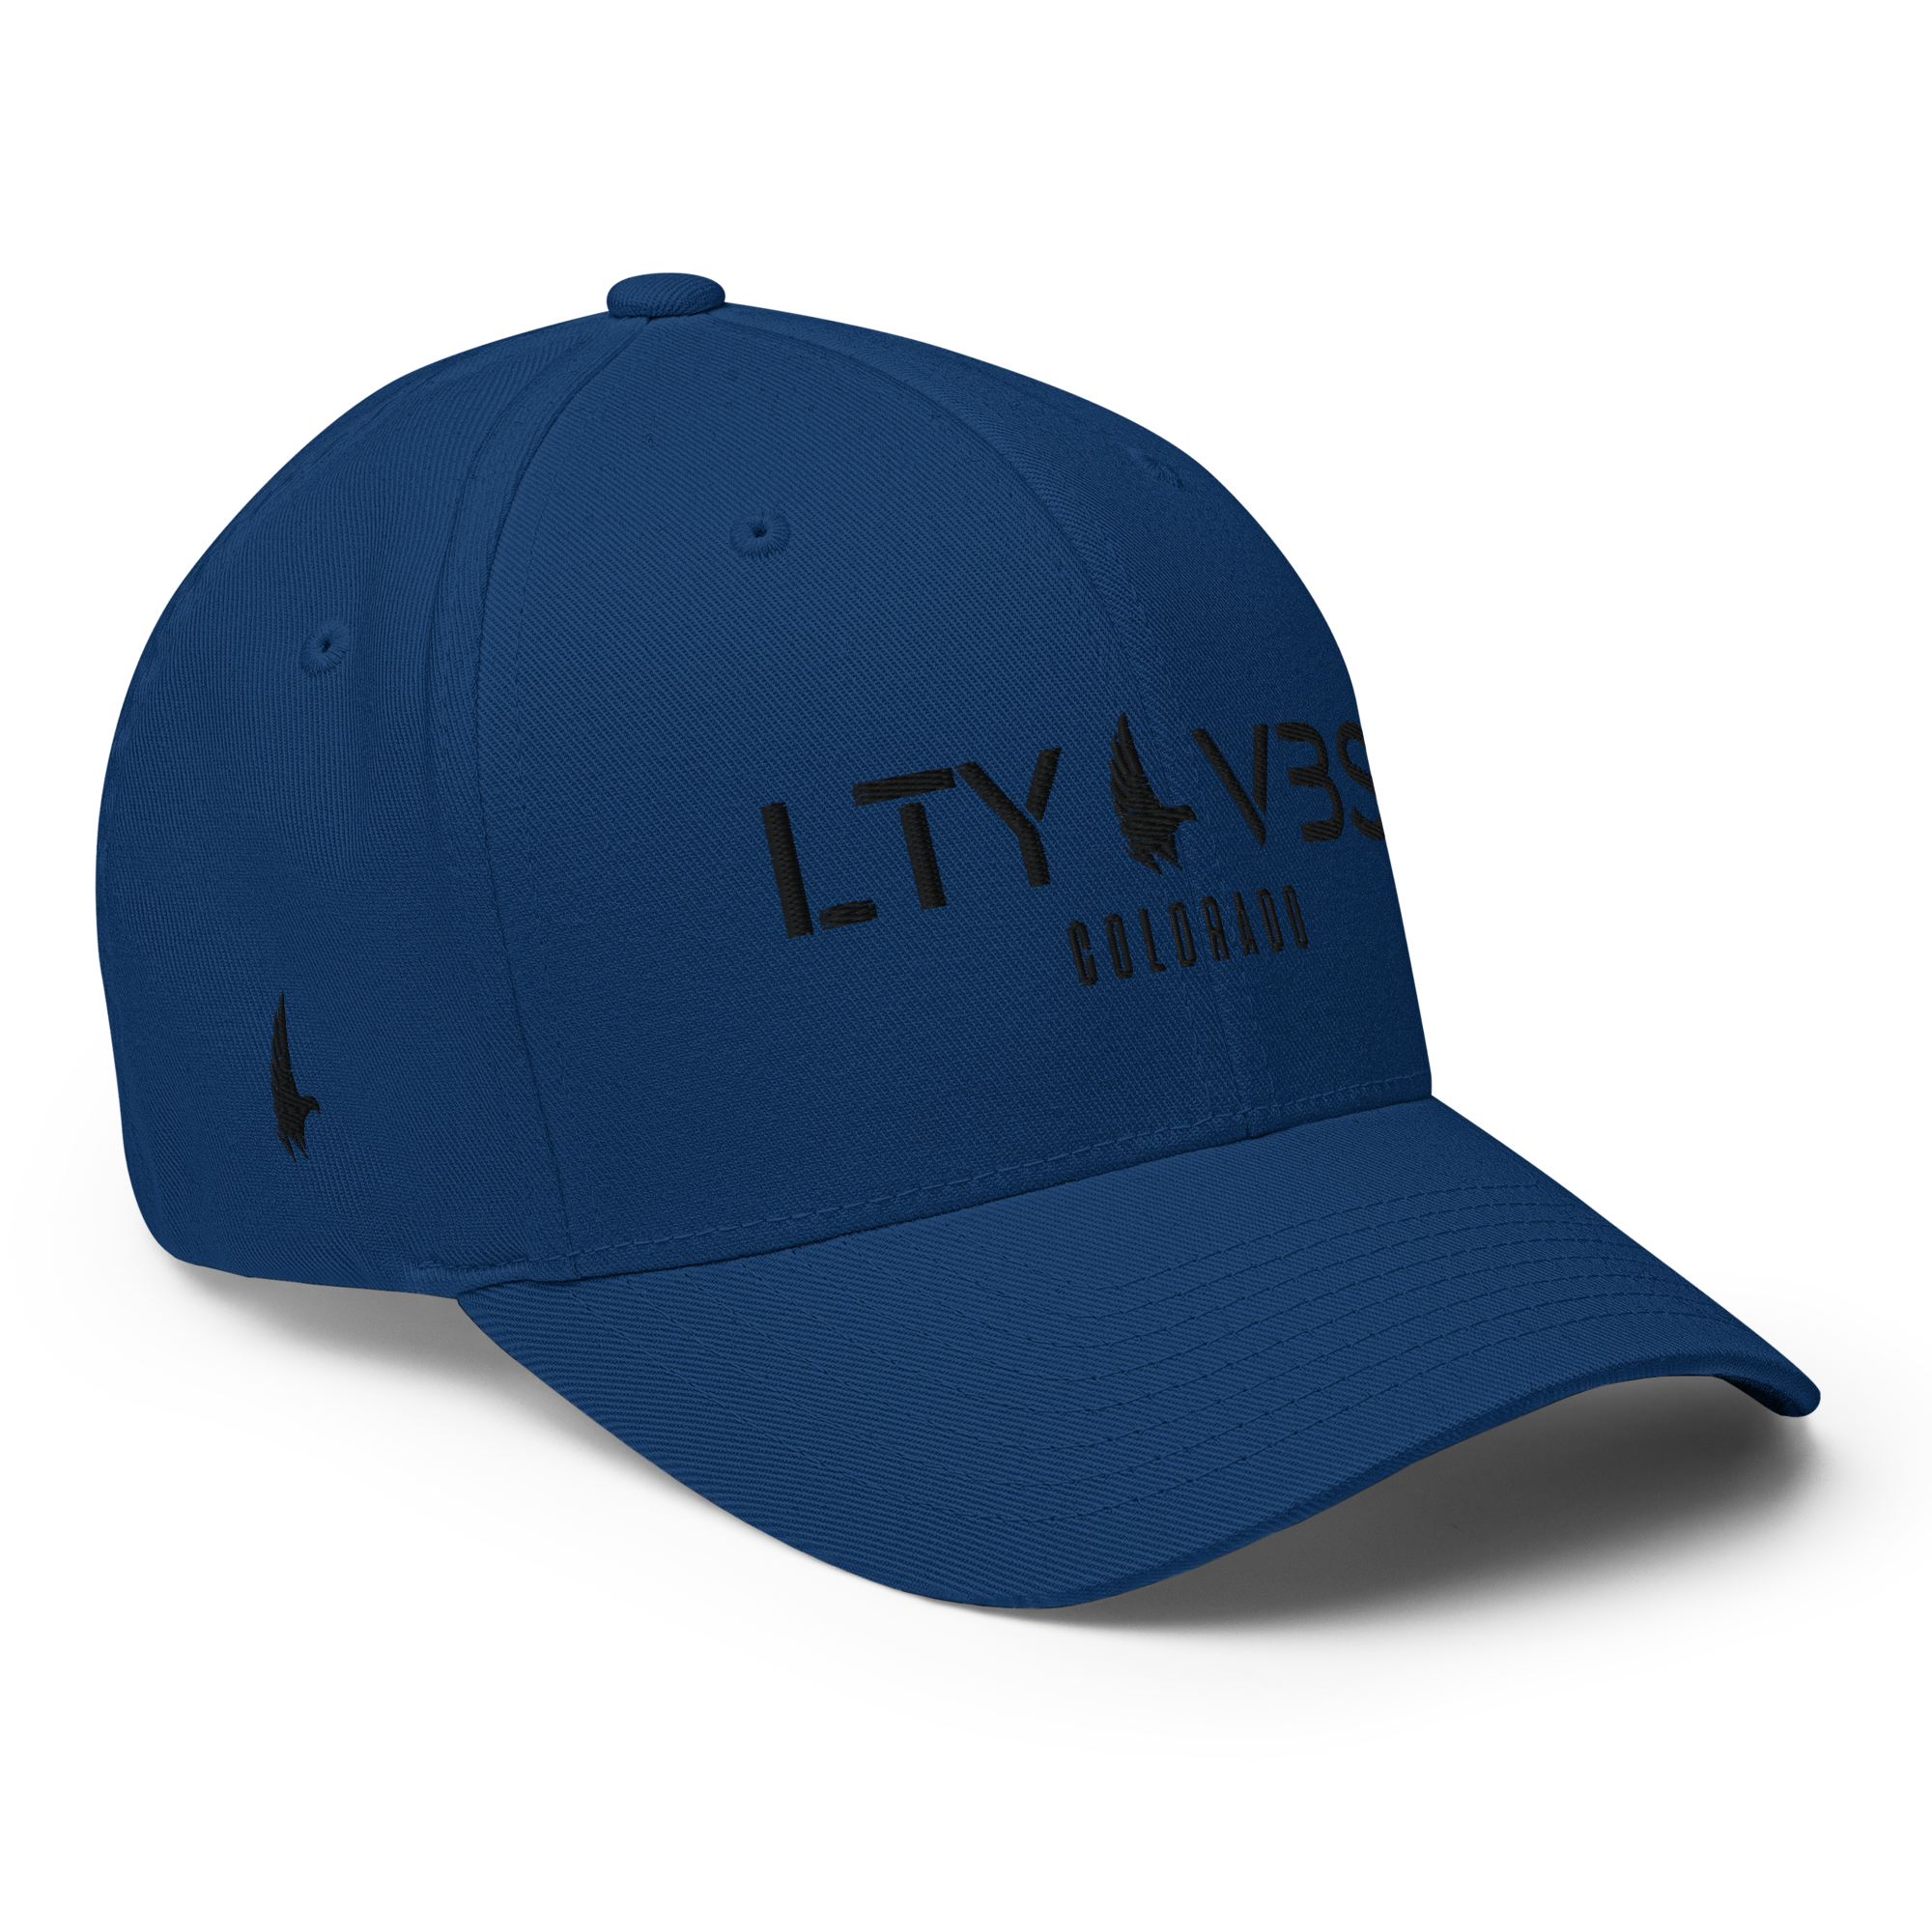 Loyalty Era Colorado Fitted Hat - Blue / Black Fitted - Loyalty Vibes